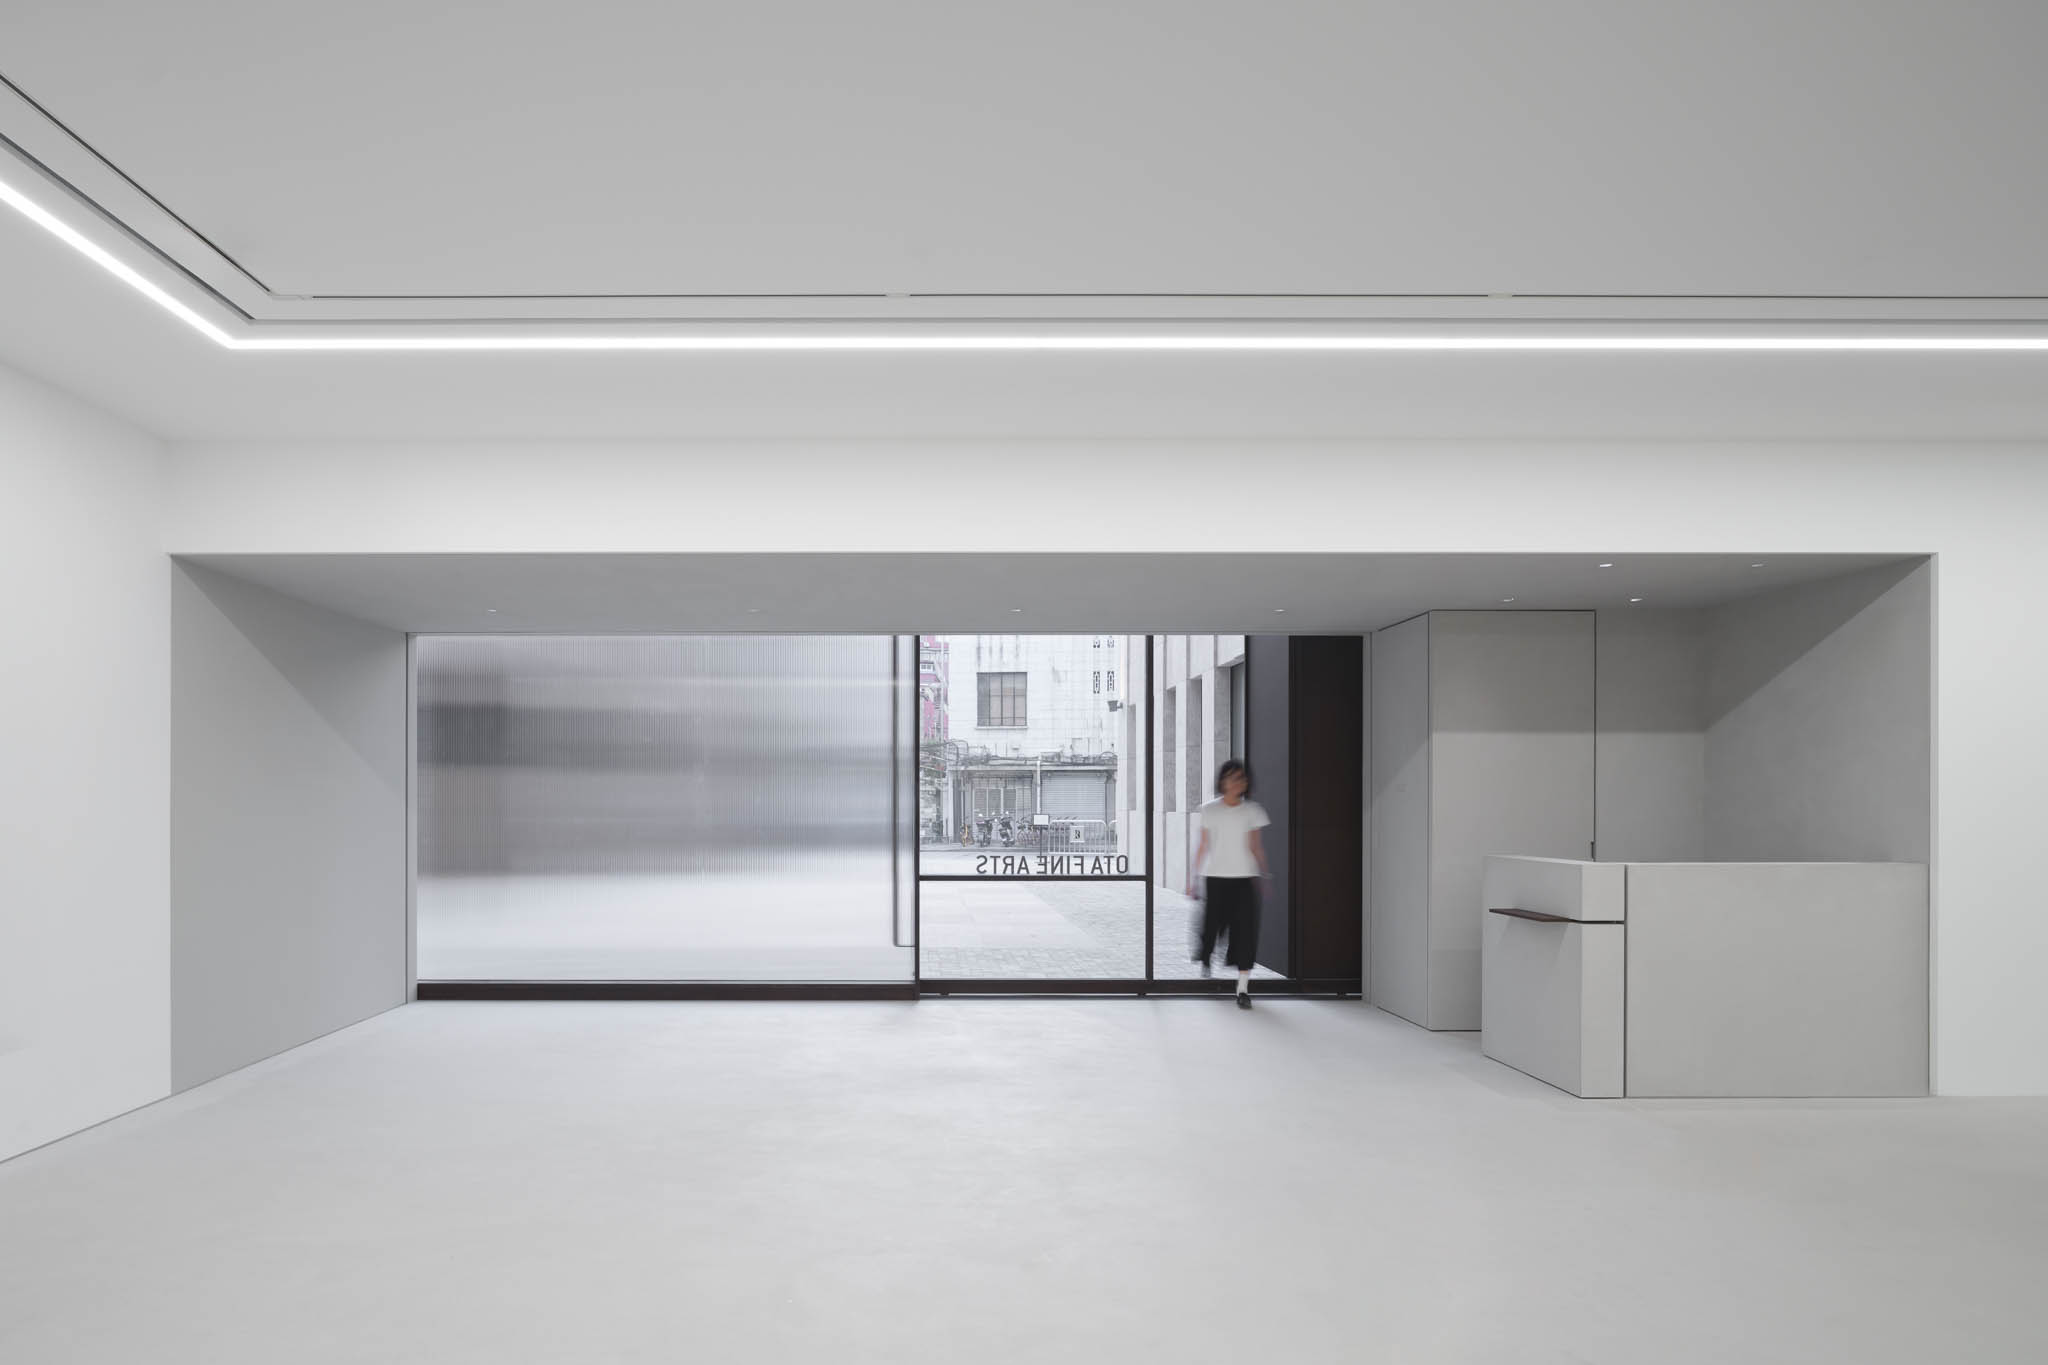 A view of the all white minimalist interior looking into the building's inner courtyard